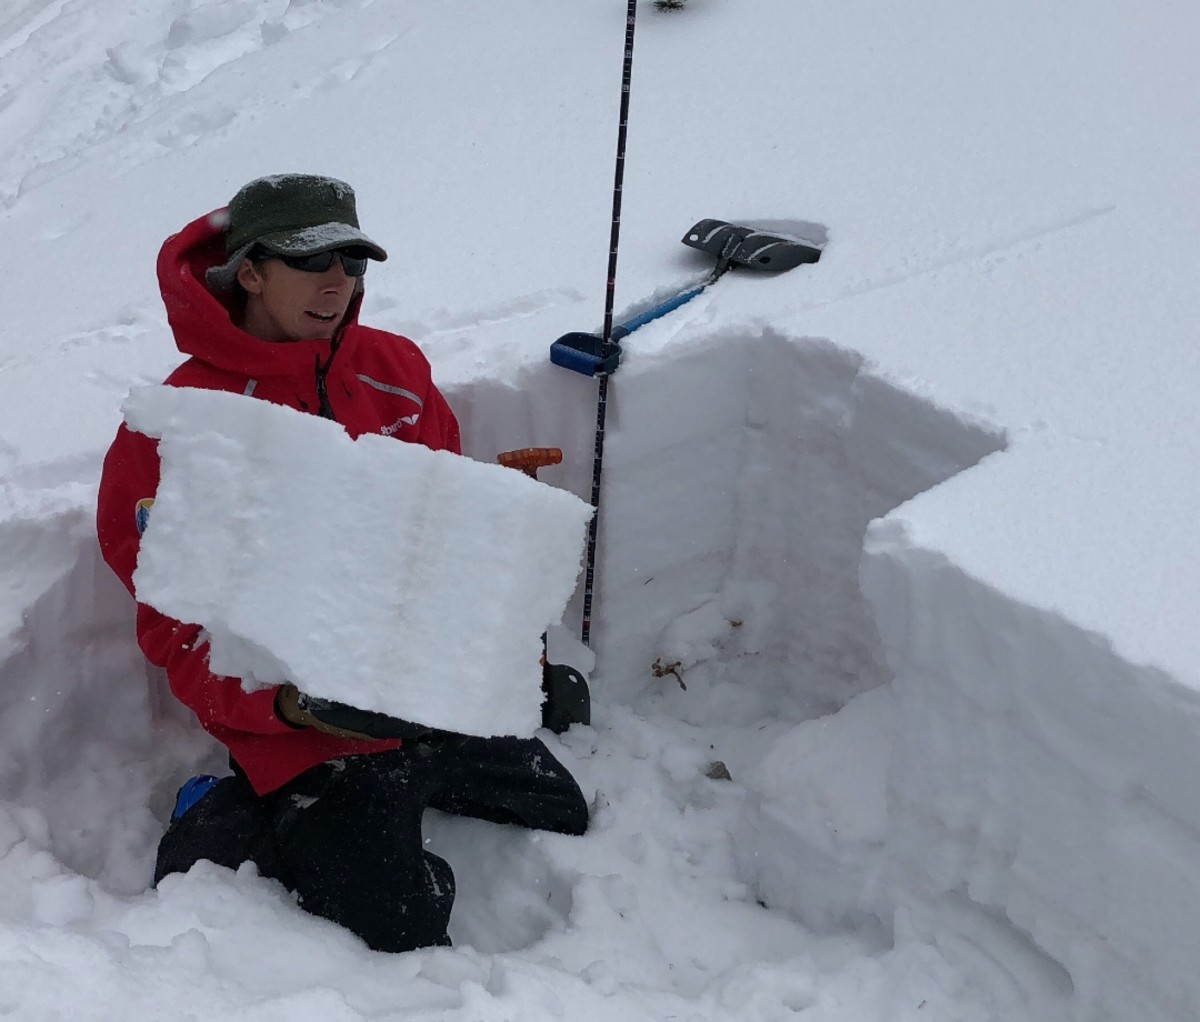 Evaluating snowpack safety to mitigate avalanche risk